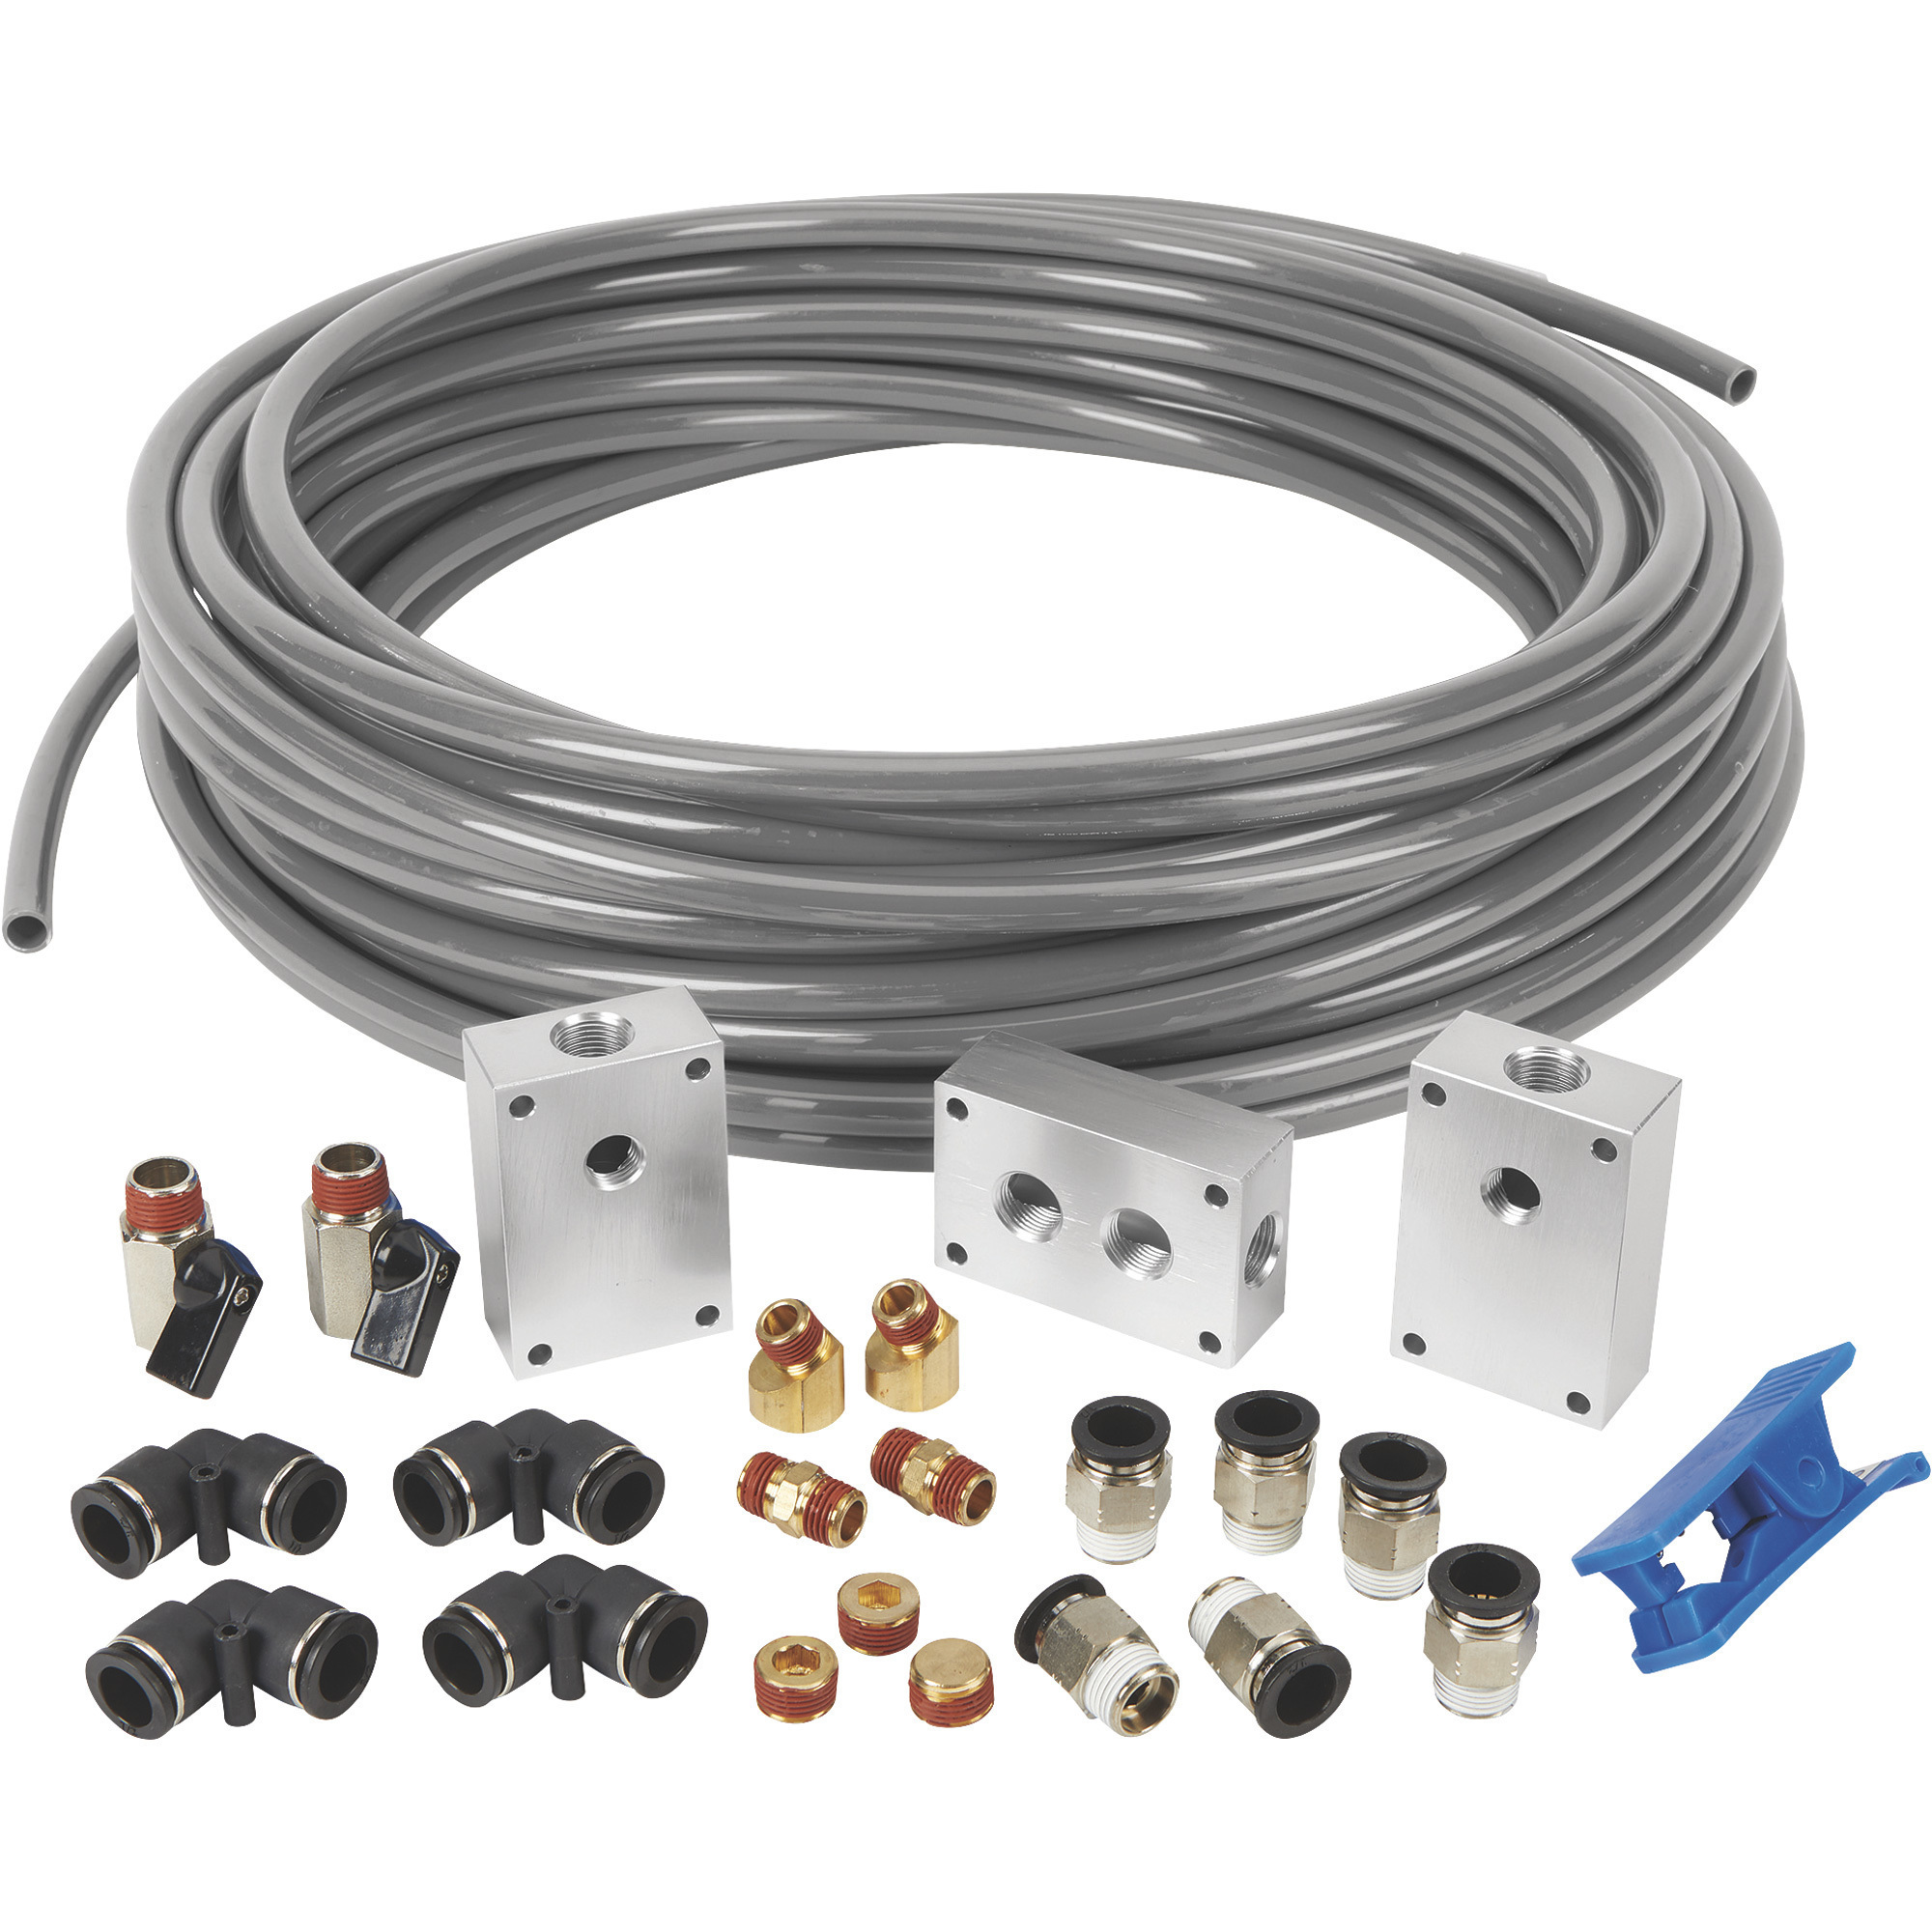 Klutch 1/2in., 100ft. Master Kit Compressed Air Piping System